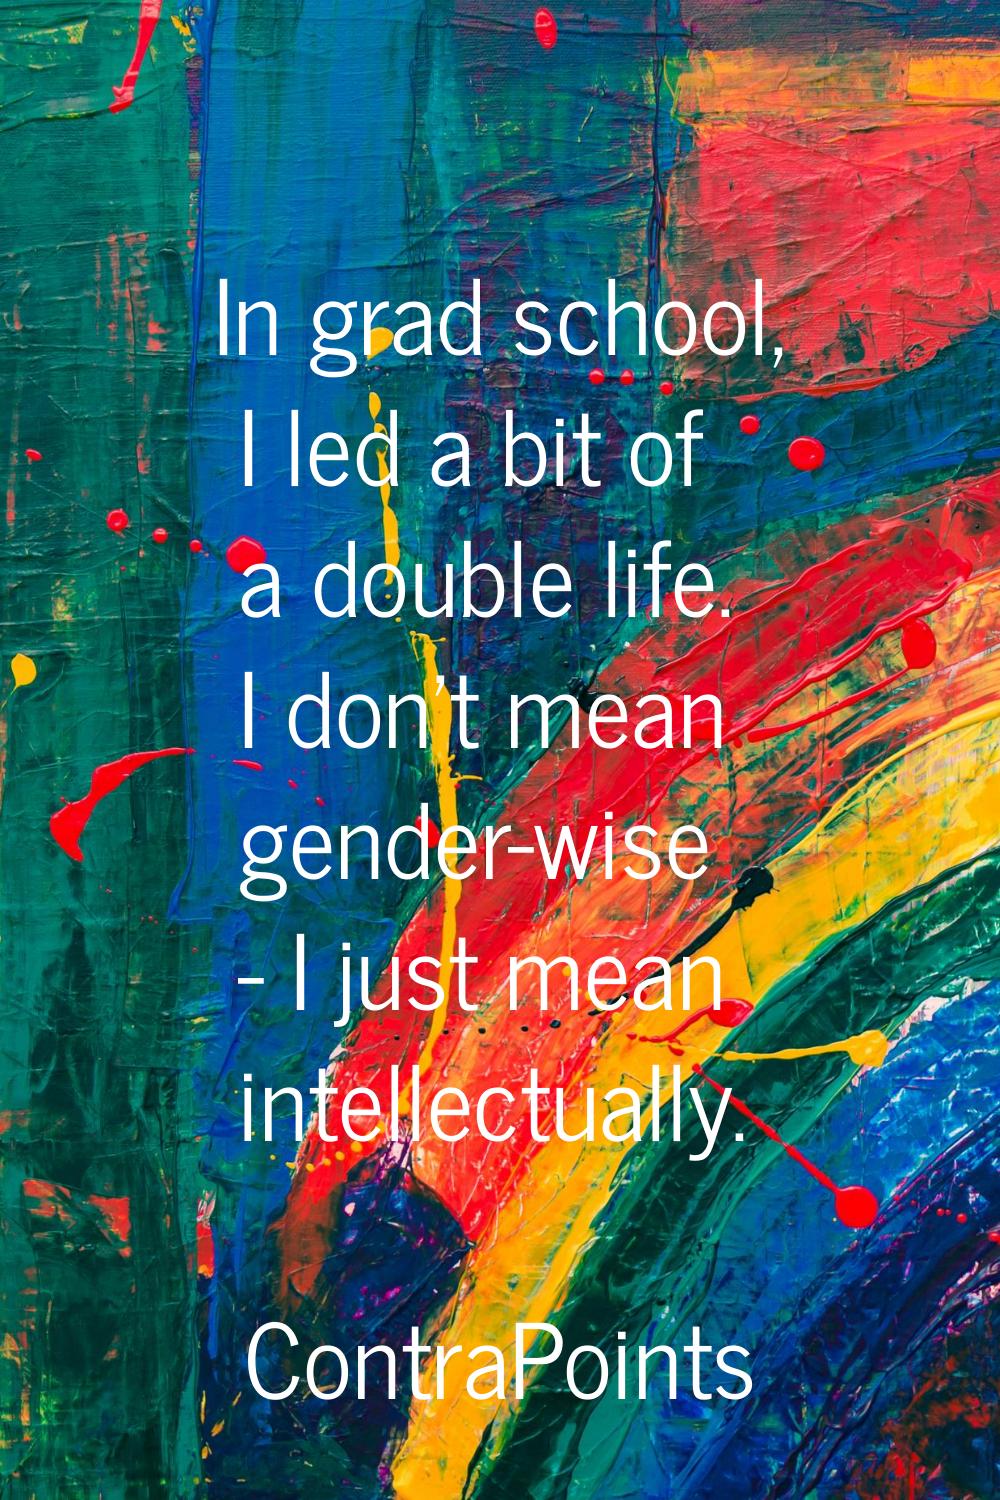 In grad school, I led a bit of a double life. I don't mean gender-wise - I just mean intellectually